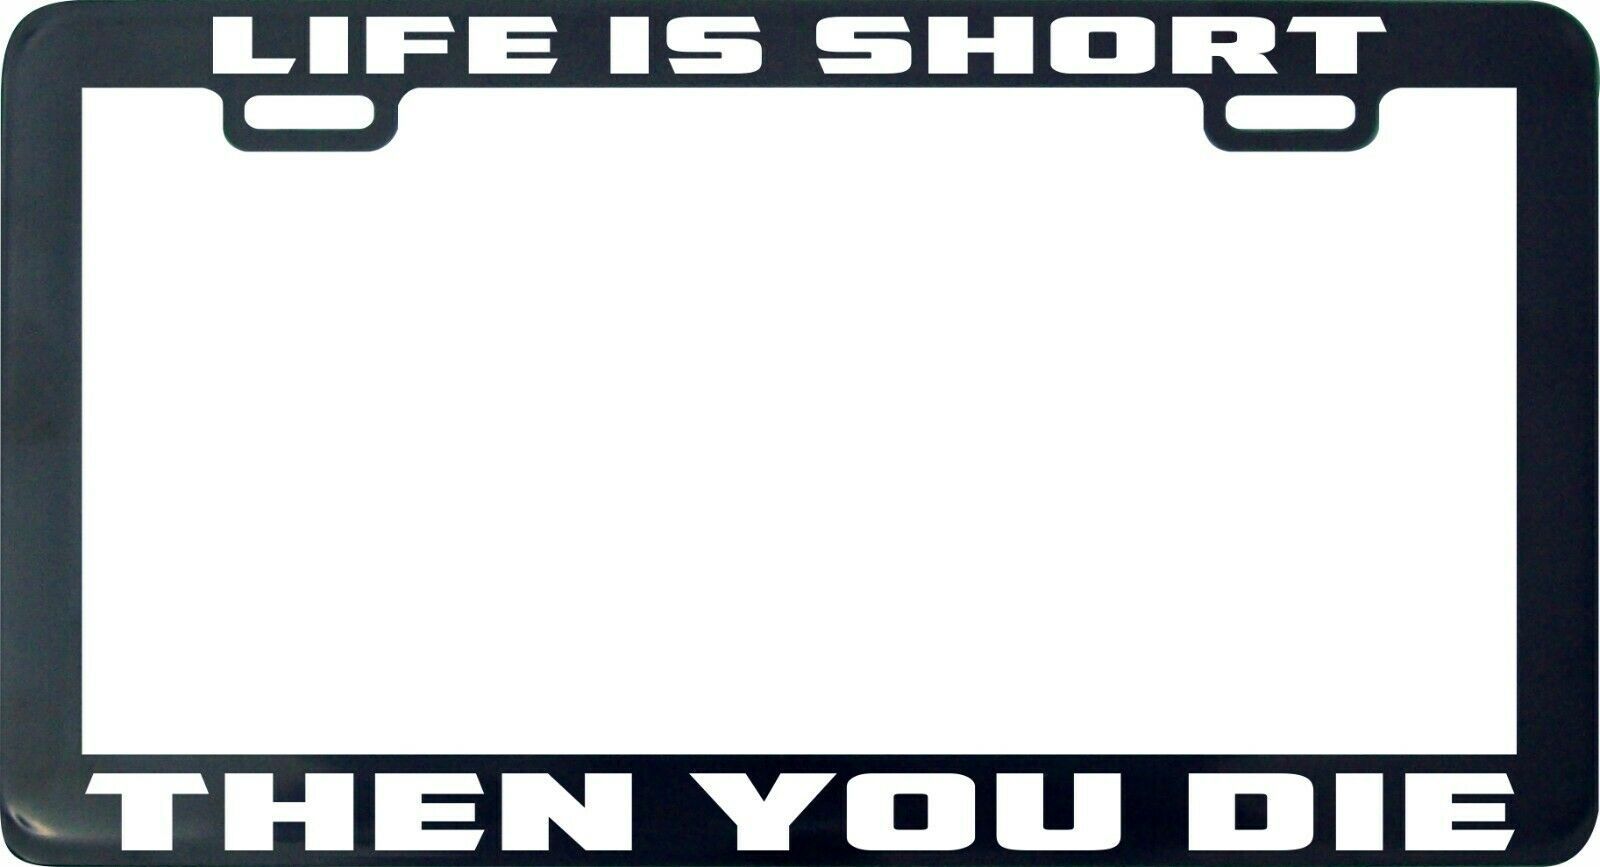 Primary image for Life is short then you die funny license plate Frame holder legal